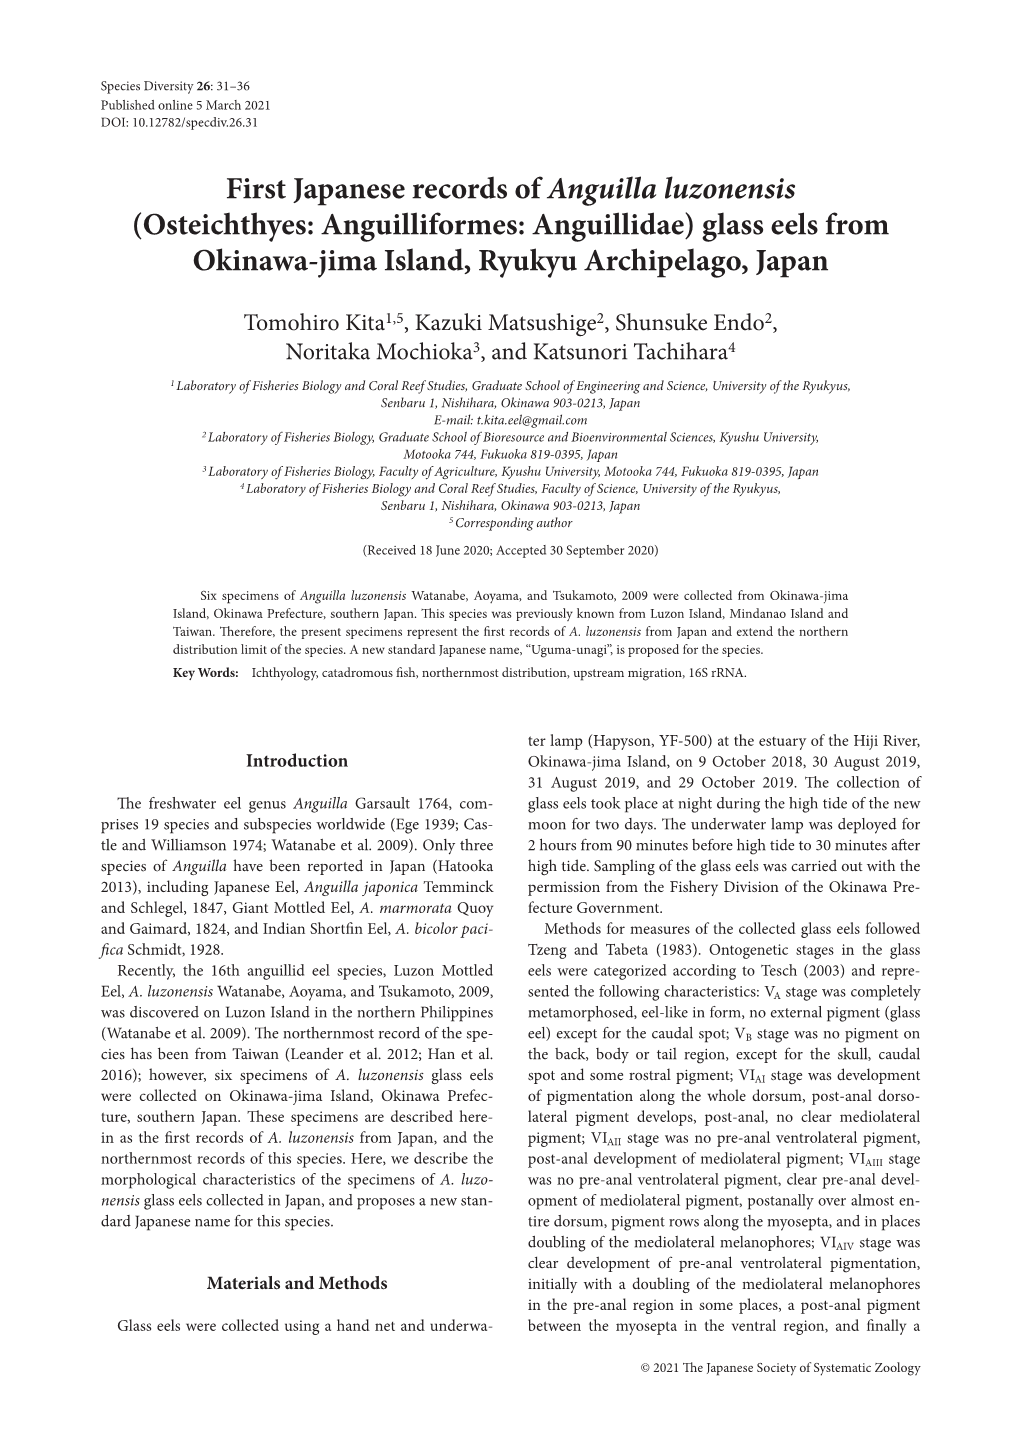 First Japanese Records of Anguilla Luzonensis (Osteichthyes: Anguilliformes: Anguillidae) Glass Eels from Okinawa-Jima Island, Ryukyu Archipelago, Japan